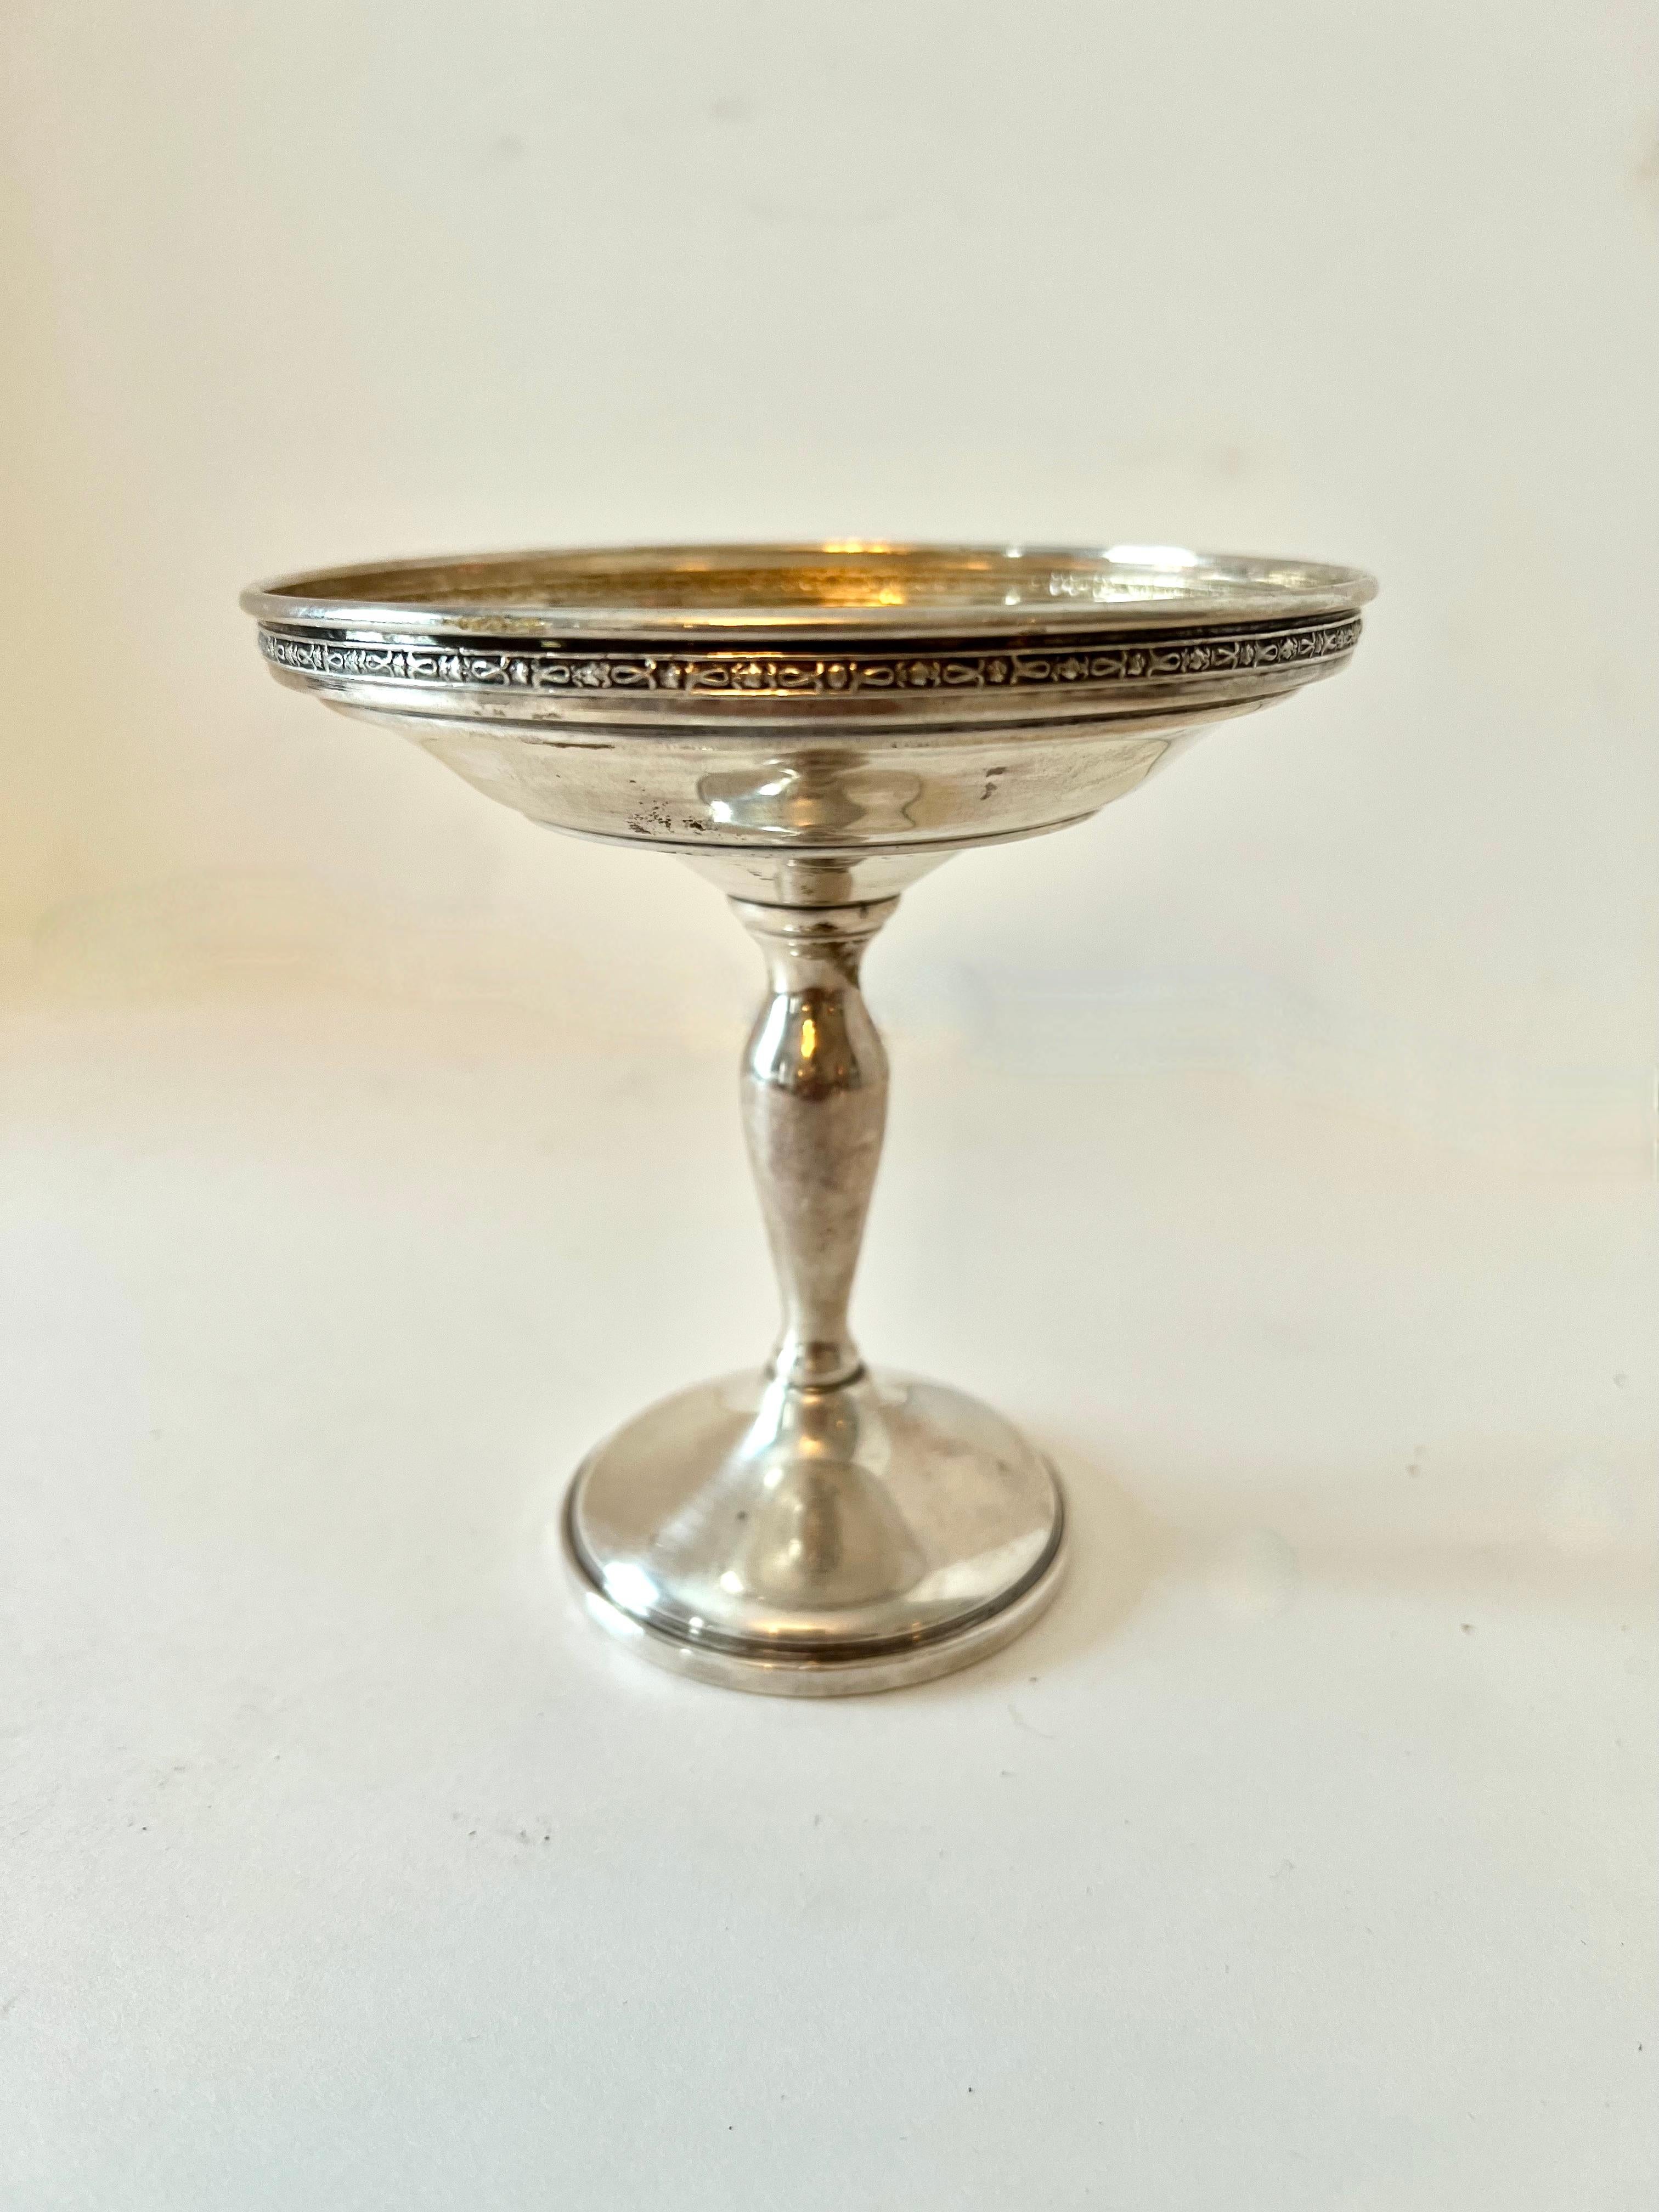 A lovely Sterling Silver compote with a simple and sophisticated edging.  The piece is a compliment to any cocktail table or bar... serving nuts to candies or for display of a floating flower.  please see our images for ideas. 

A wonderful hostess